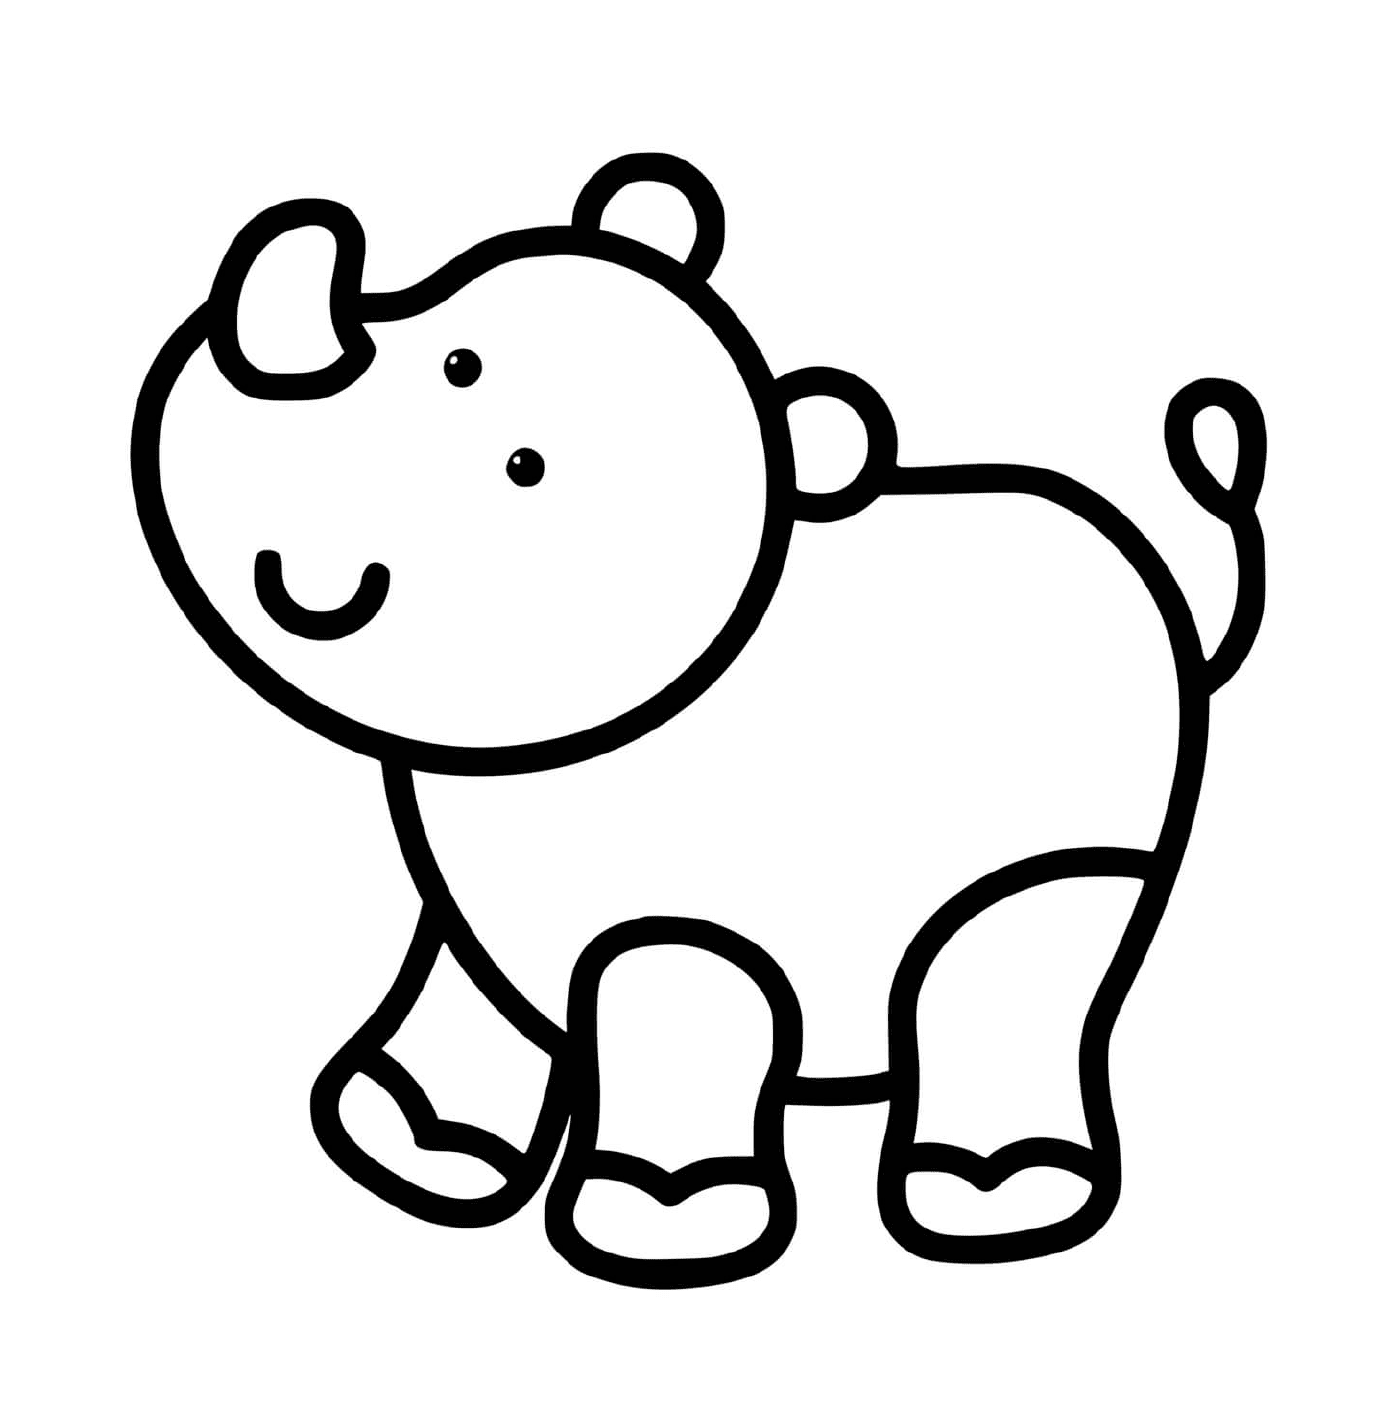  An easy to draw rhinoceros for 2-year-olds 